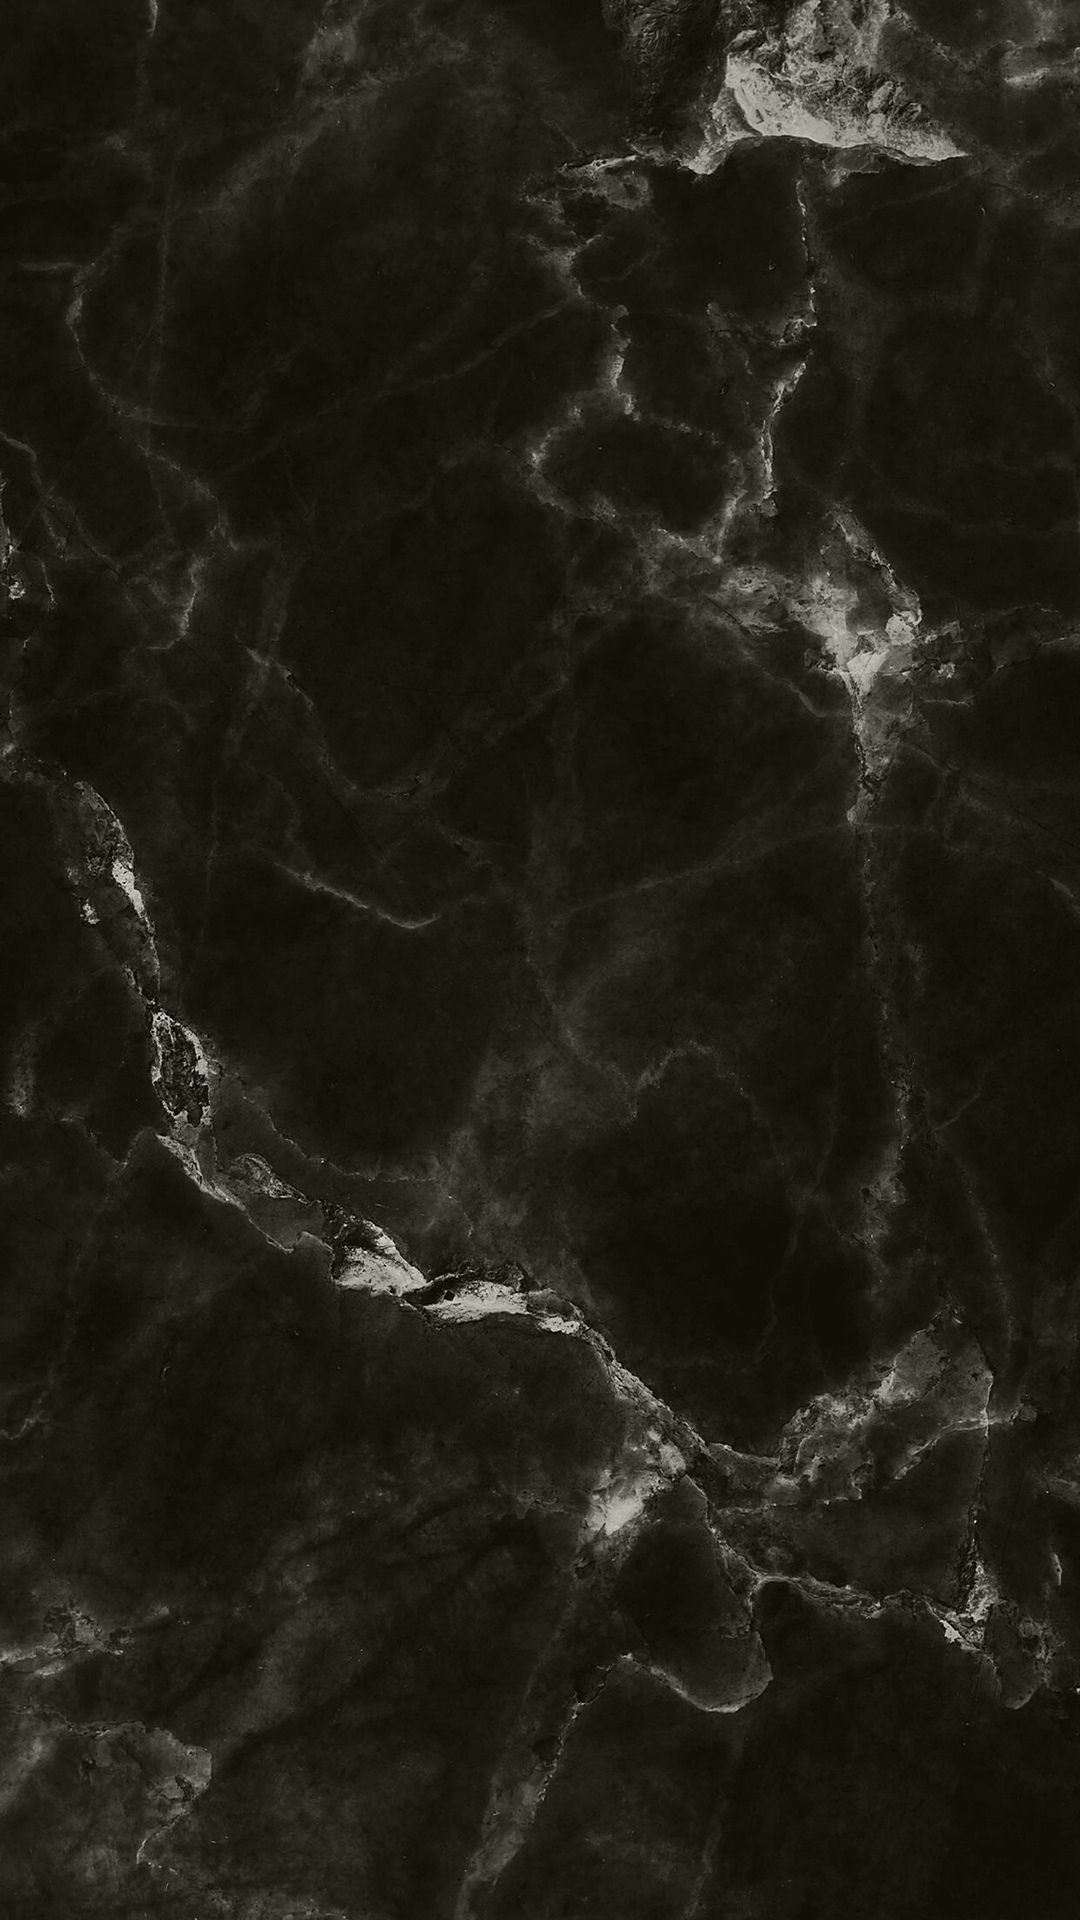 Black Marble Wallpaper 10801920. Marble background iphone, Marble iphone wallpaper, iPhone wallpaper